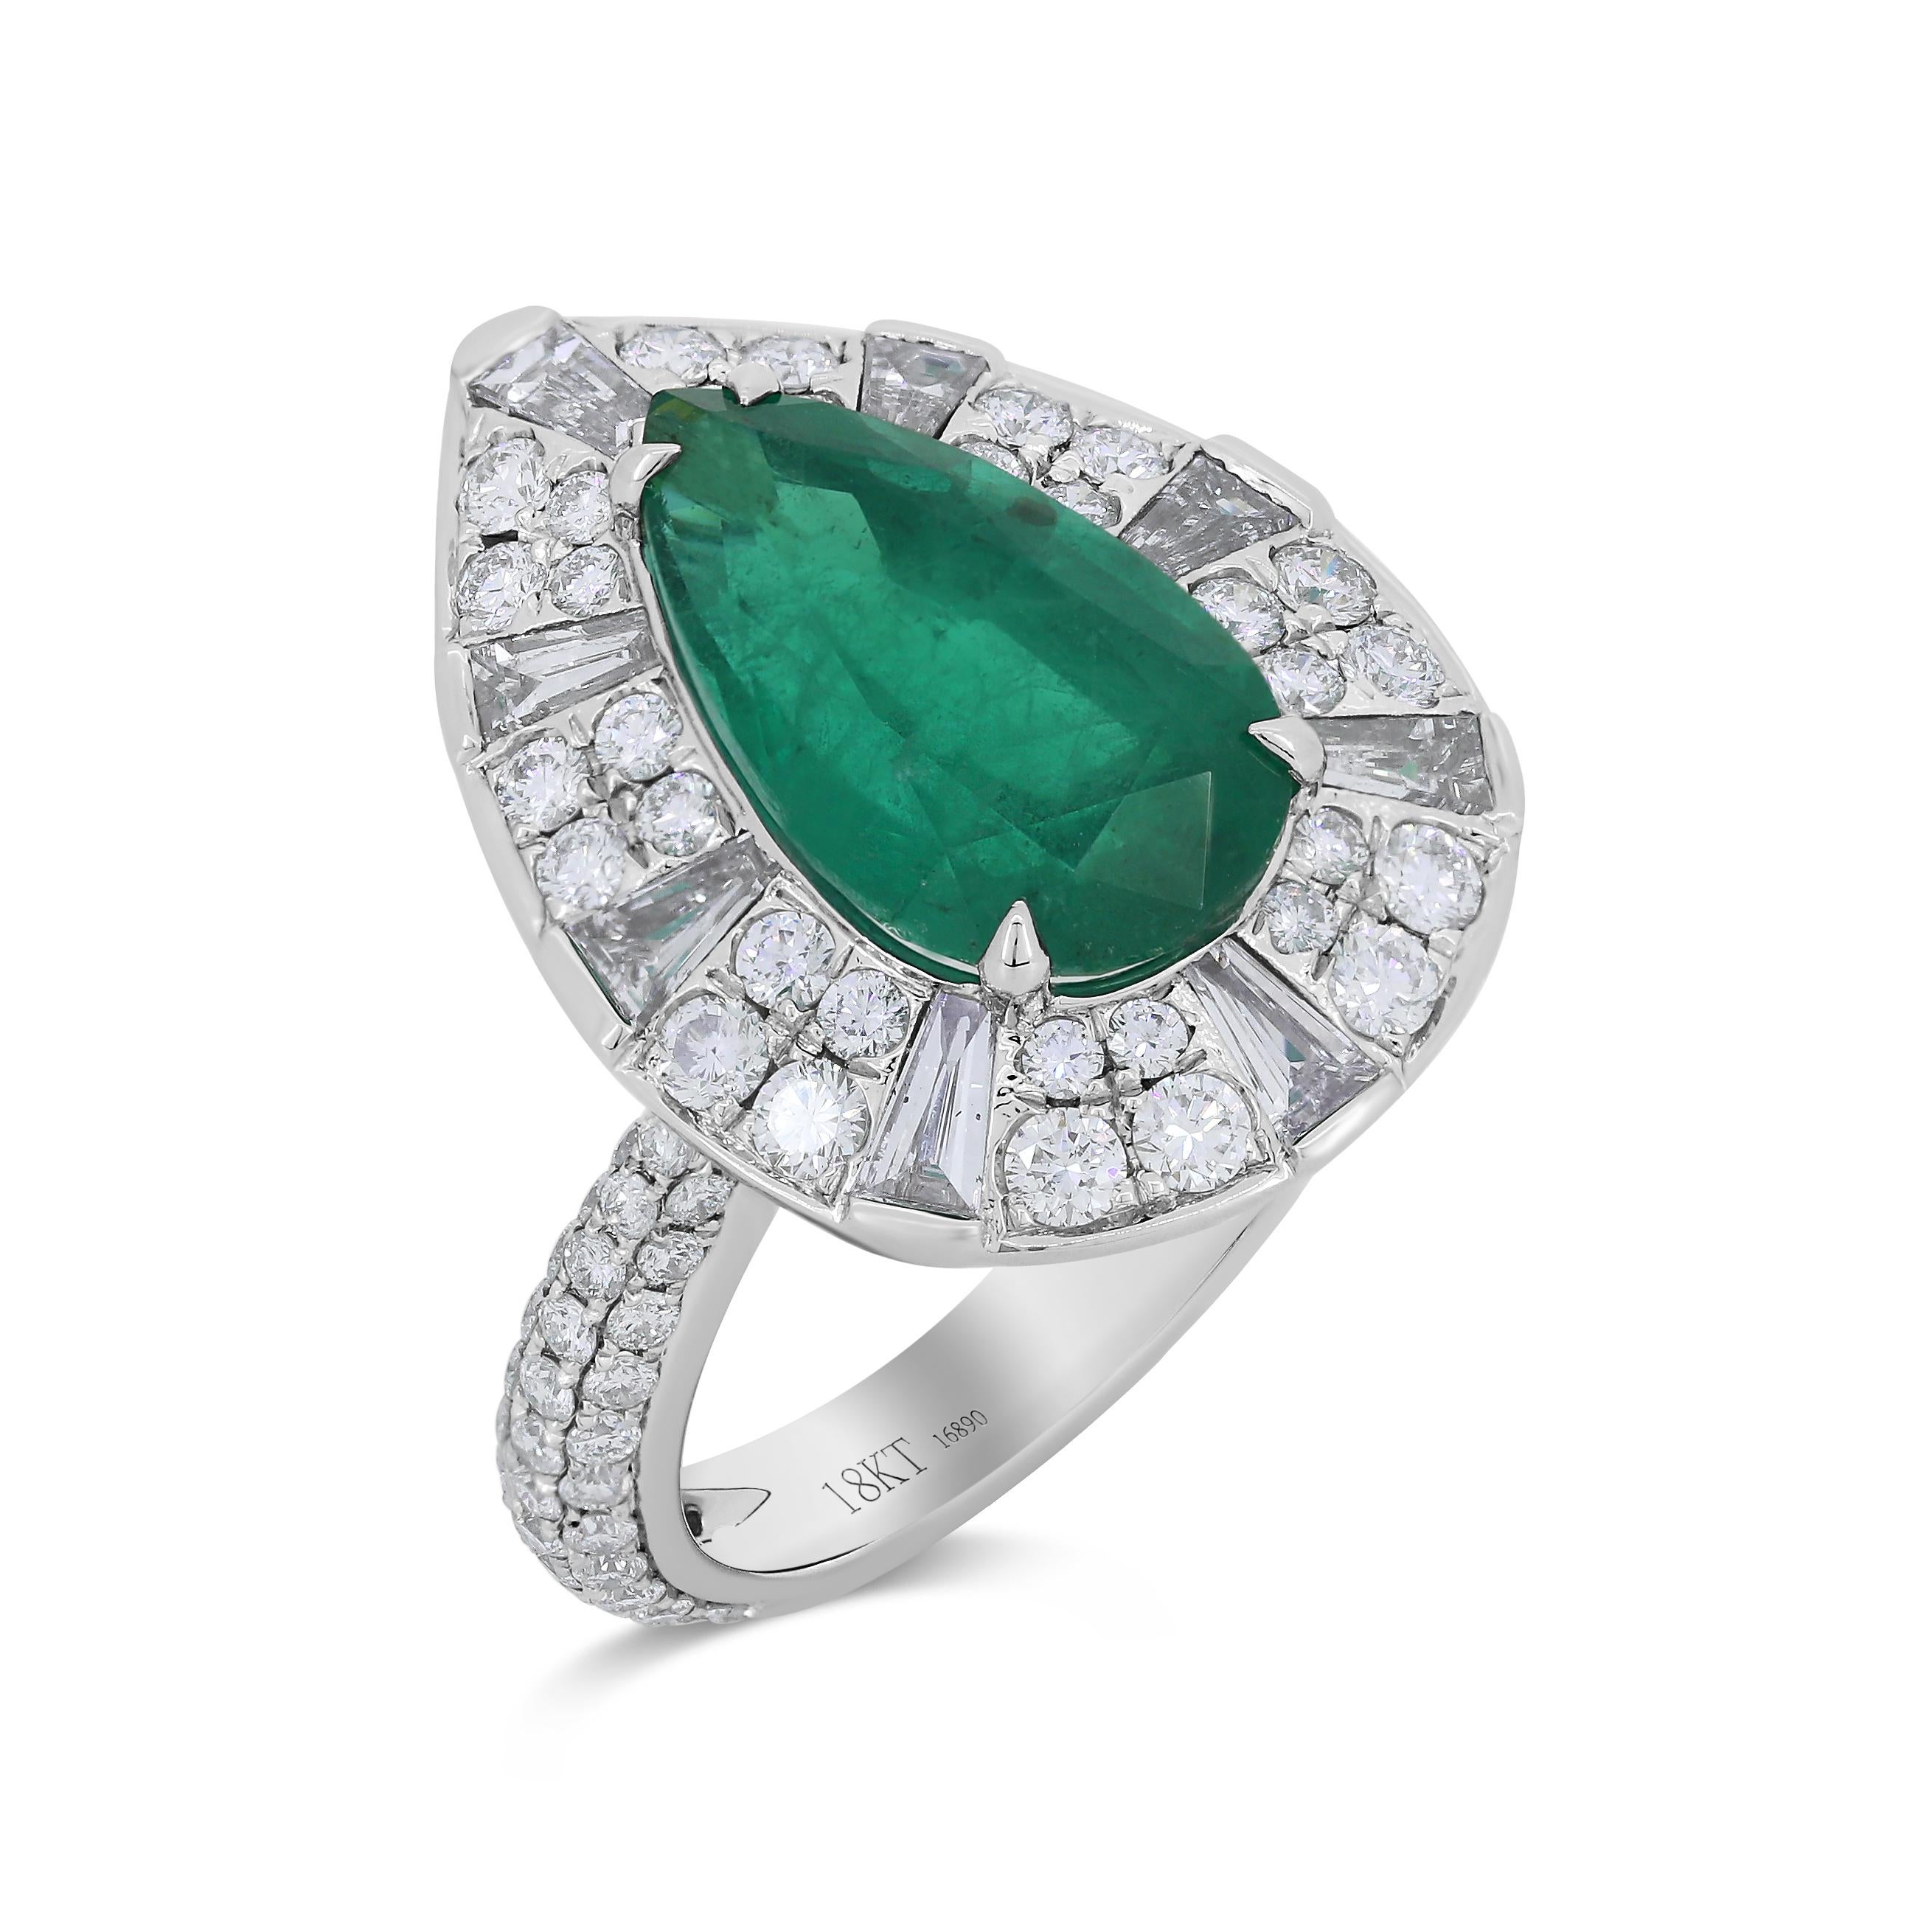 This 18K White Gold pear shape emerald ring is amazingly designed by Nigaam with a variety of white diamonds. On the ring, there are round full cut white diamonds set in micro pave settings. Also, this lovely ring has baguette full cut white